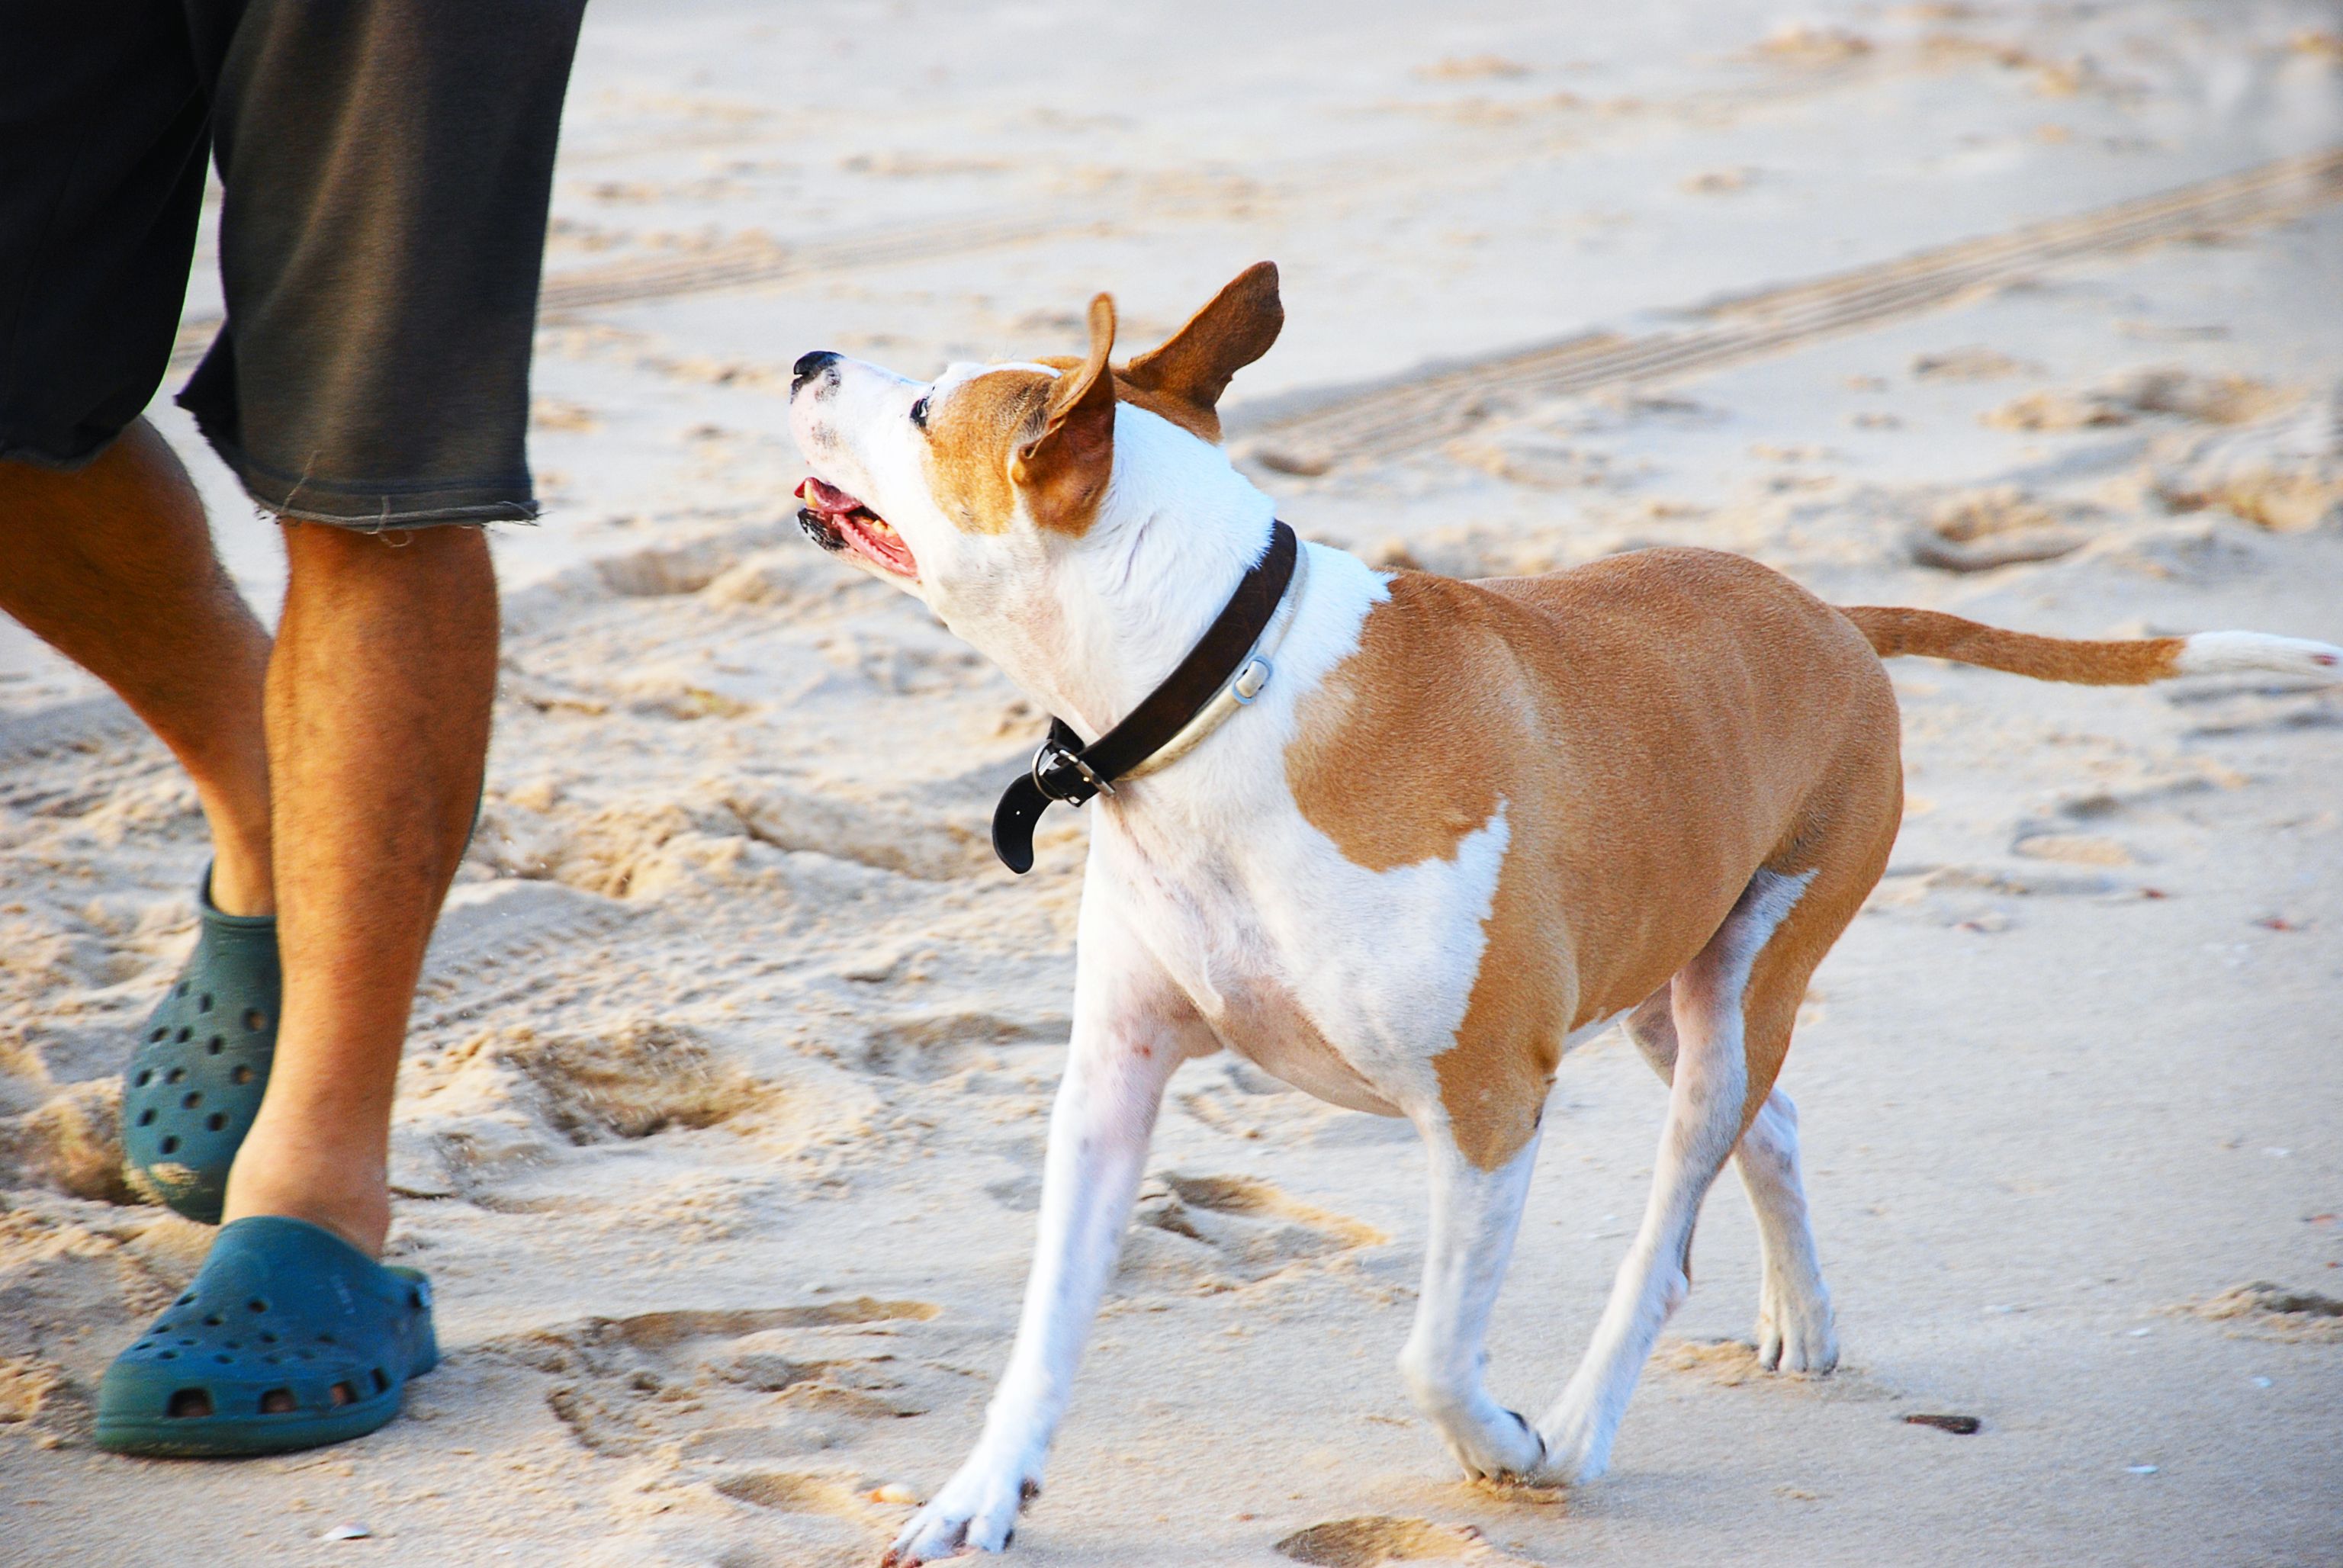 A dog walking next to an individual on the beach. | Source: Shutterstock 